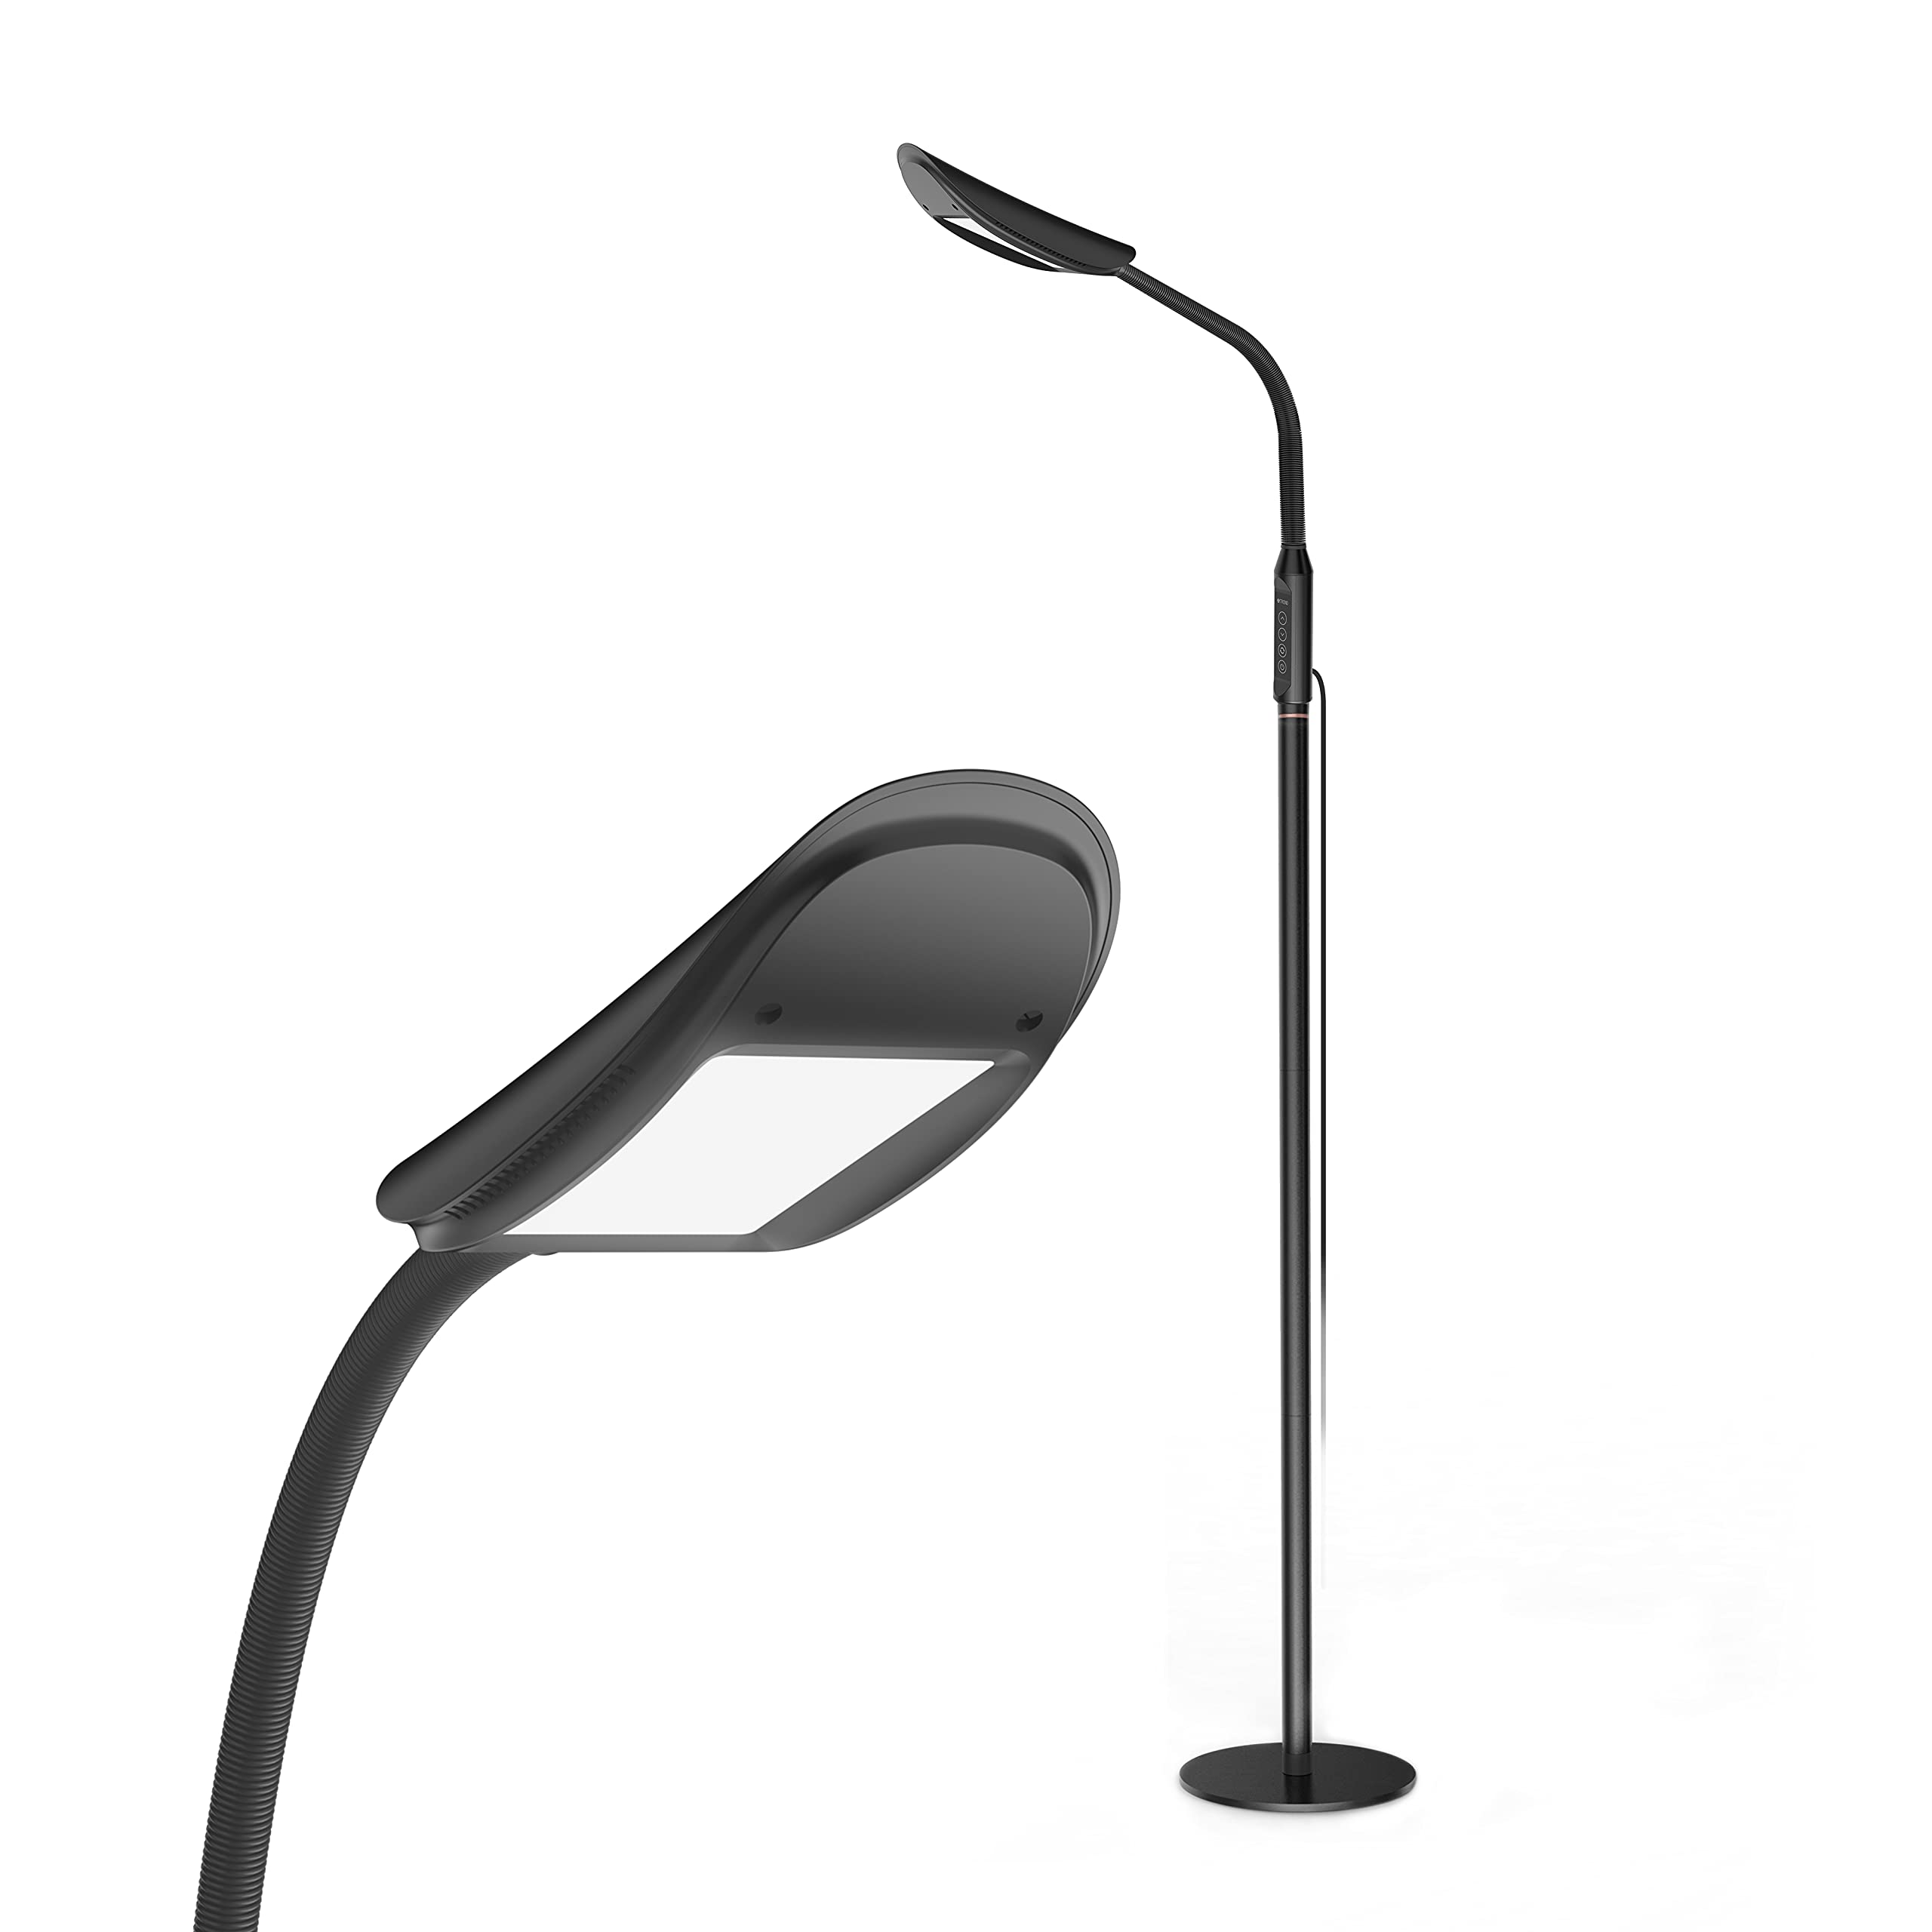 TROND LED Gooseneck Floor Lamp(5 Color Temperatures, 5-Level Dimmable, 30-Minute Timer) for Reading, Office, Crafts, Knitting, Sewing or Makeup